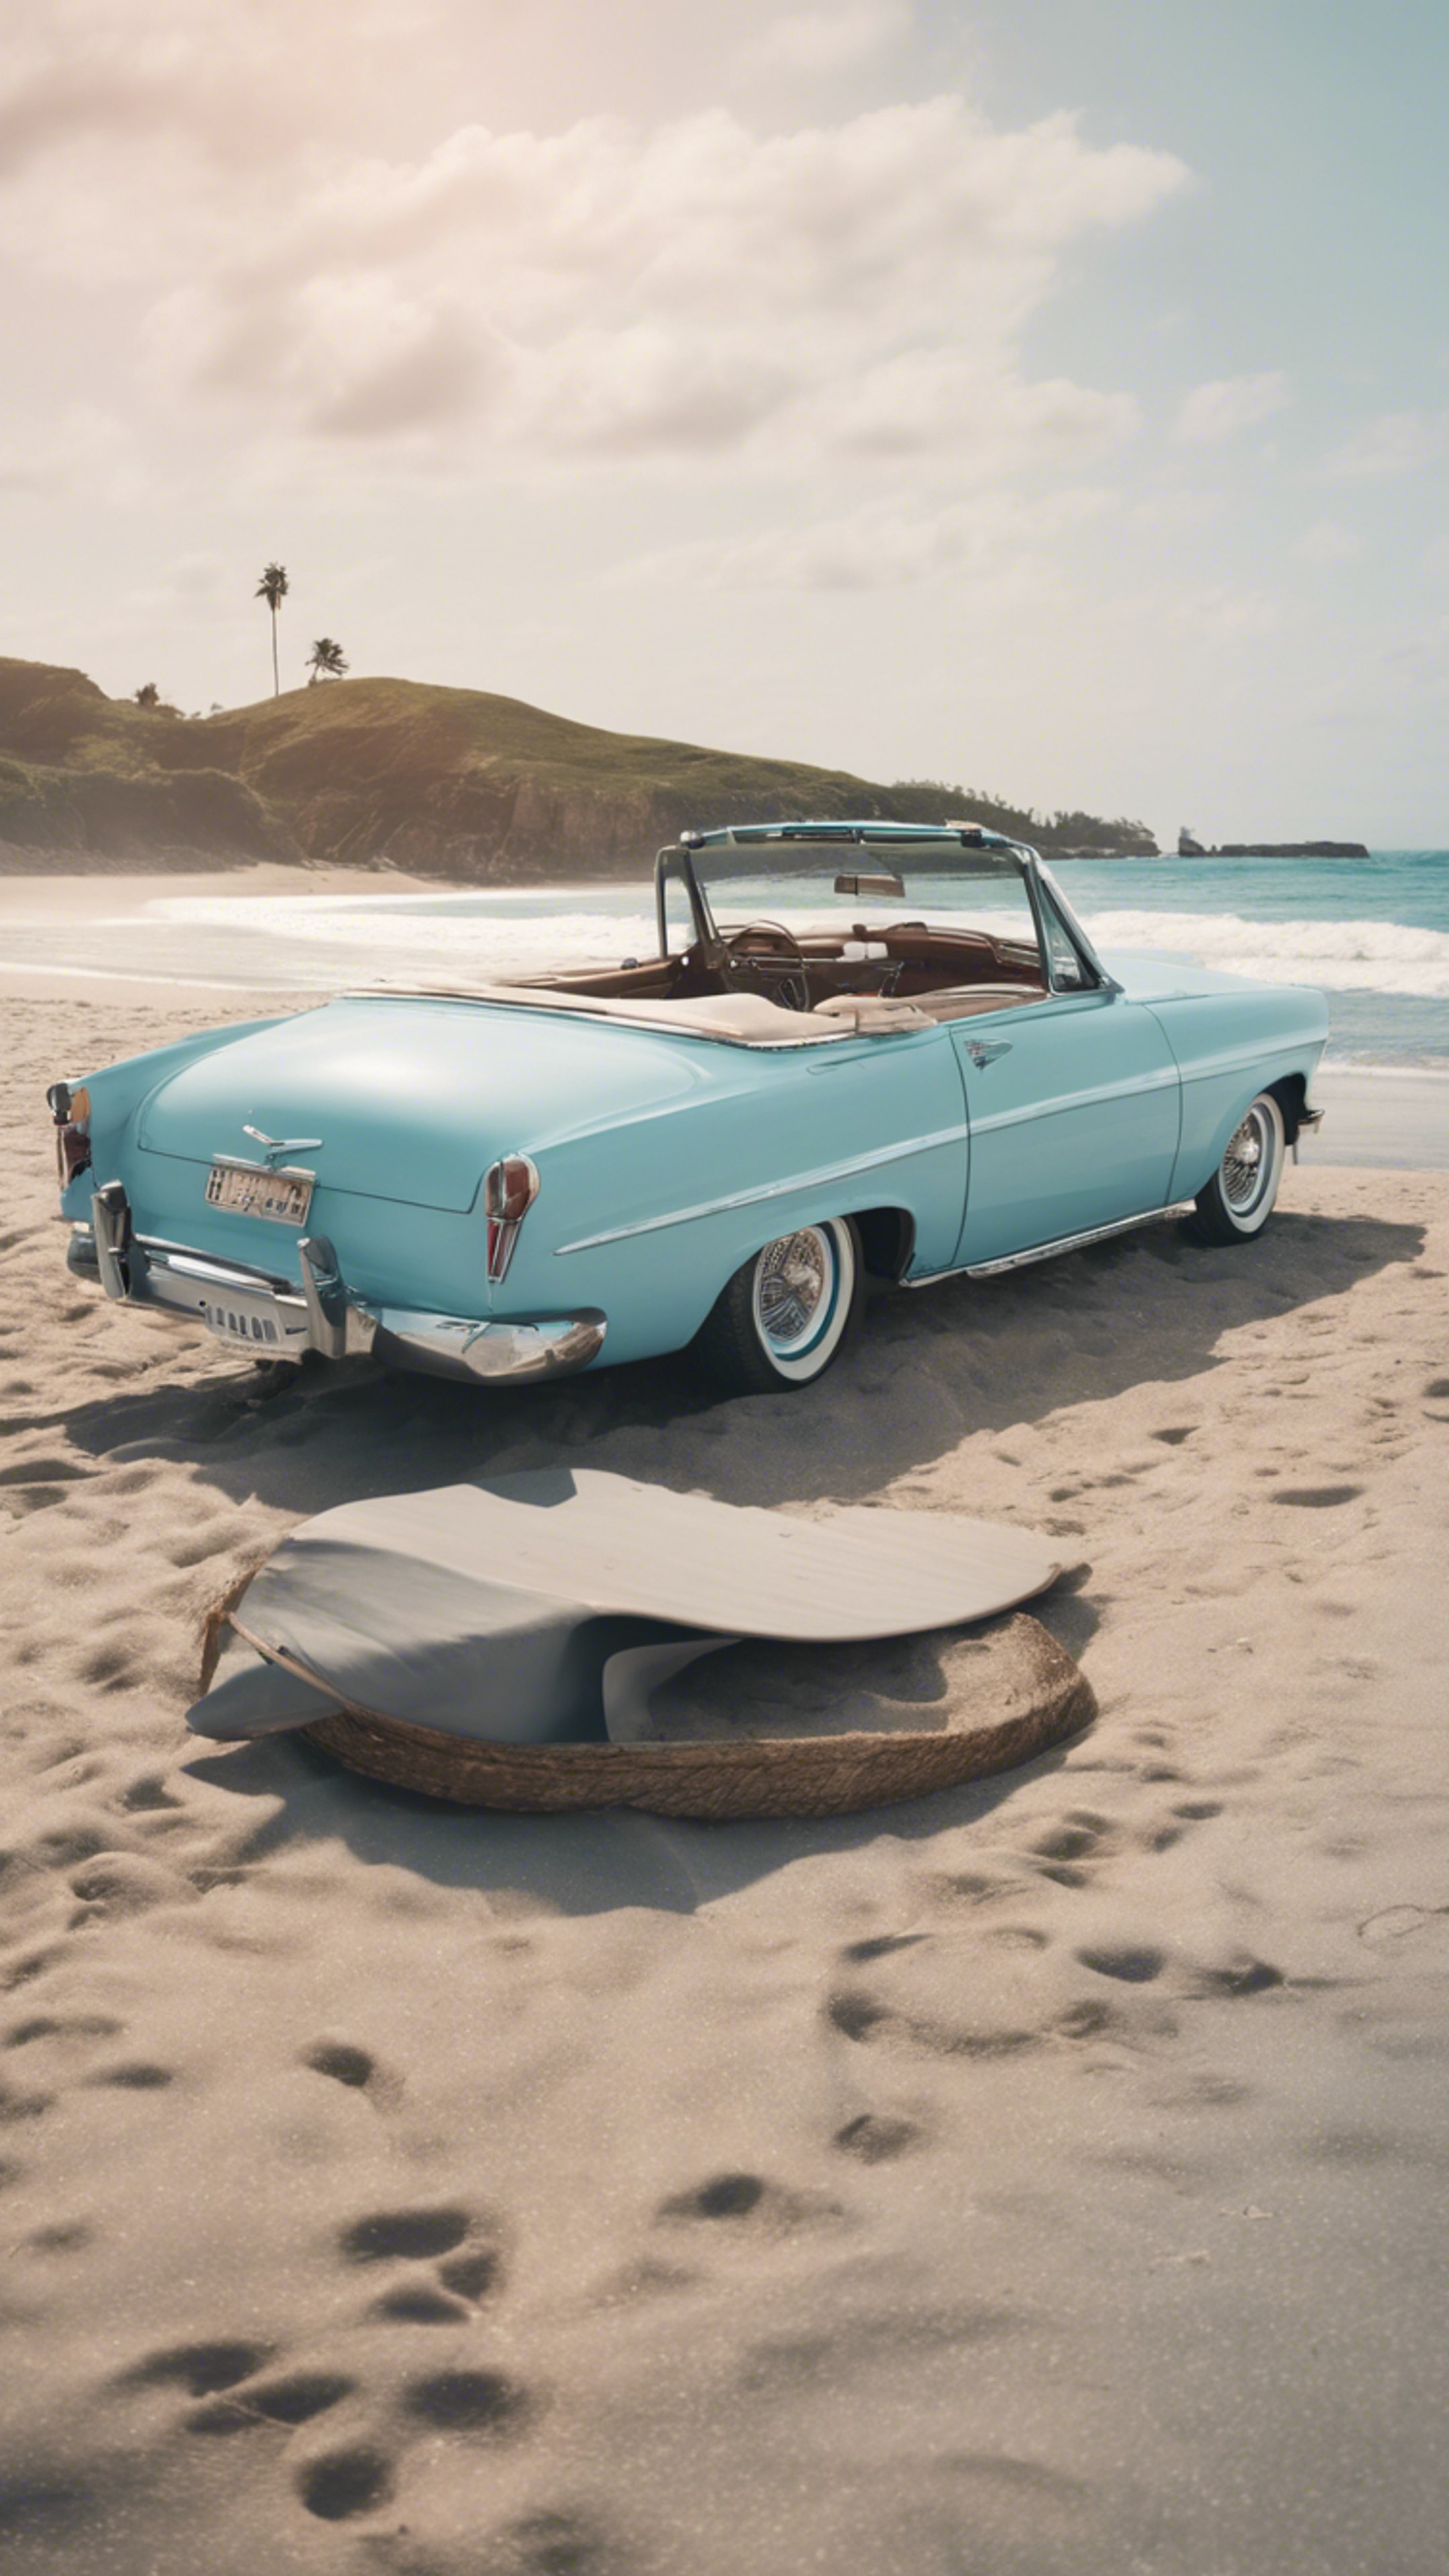 A vintage pastel blue convertible parked by a beach with surfboards leaning against it. Tapeta[b081d9fd70654569bba1]